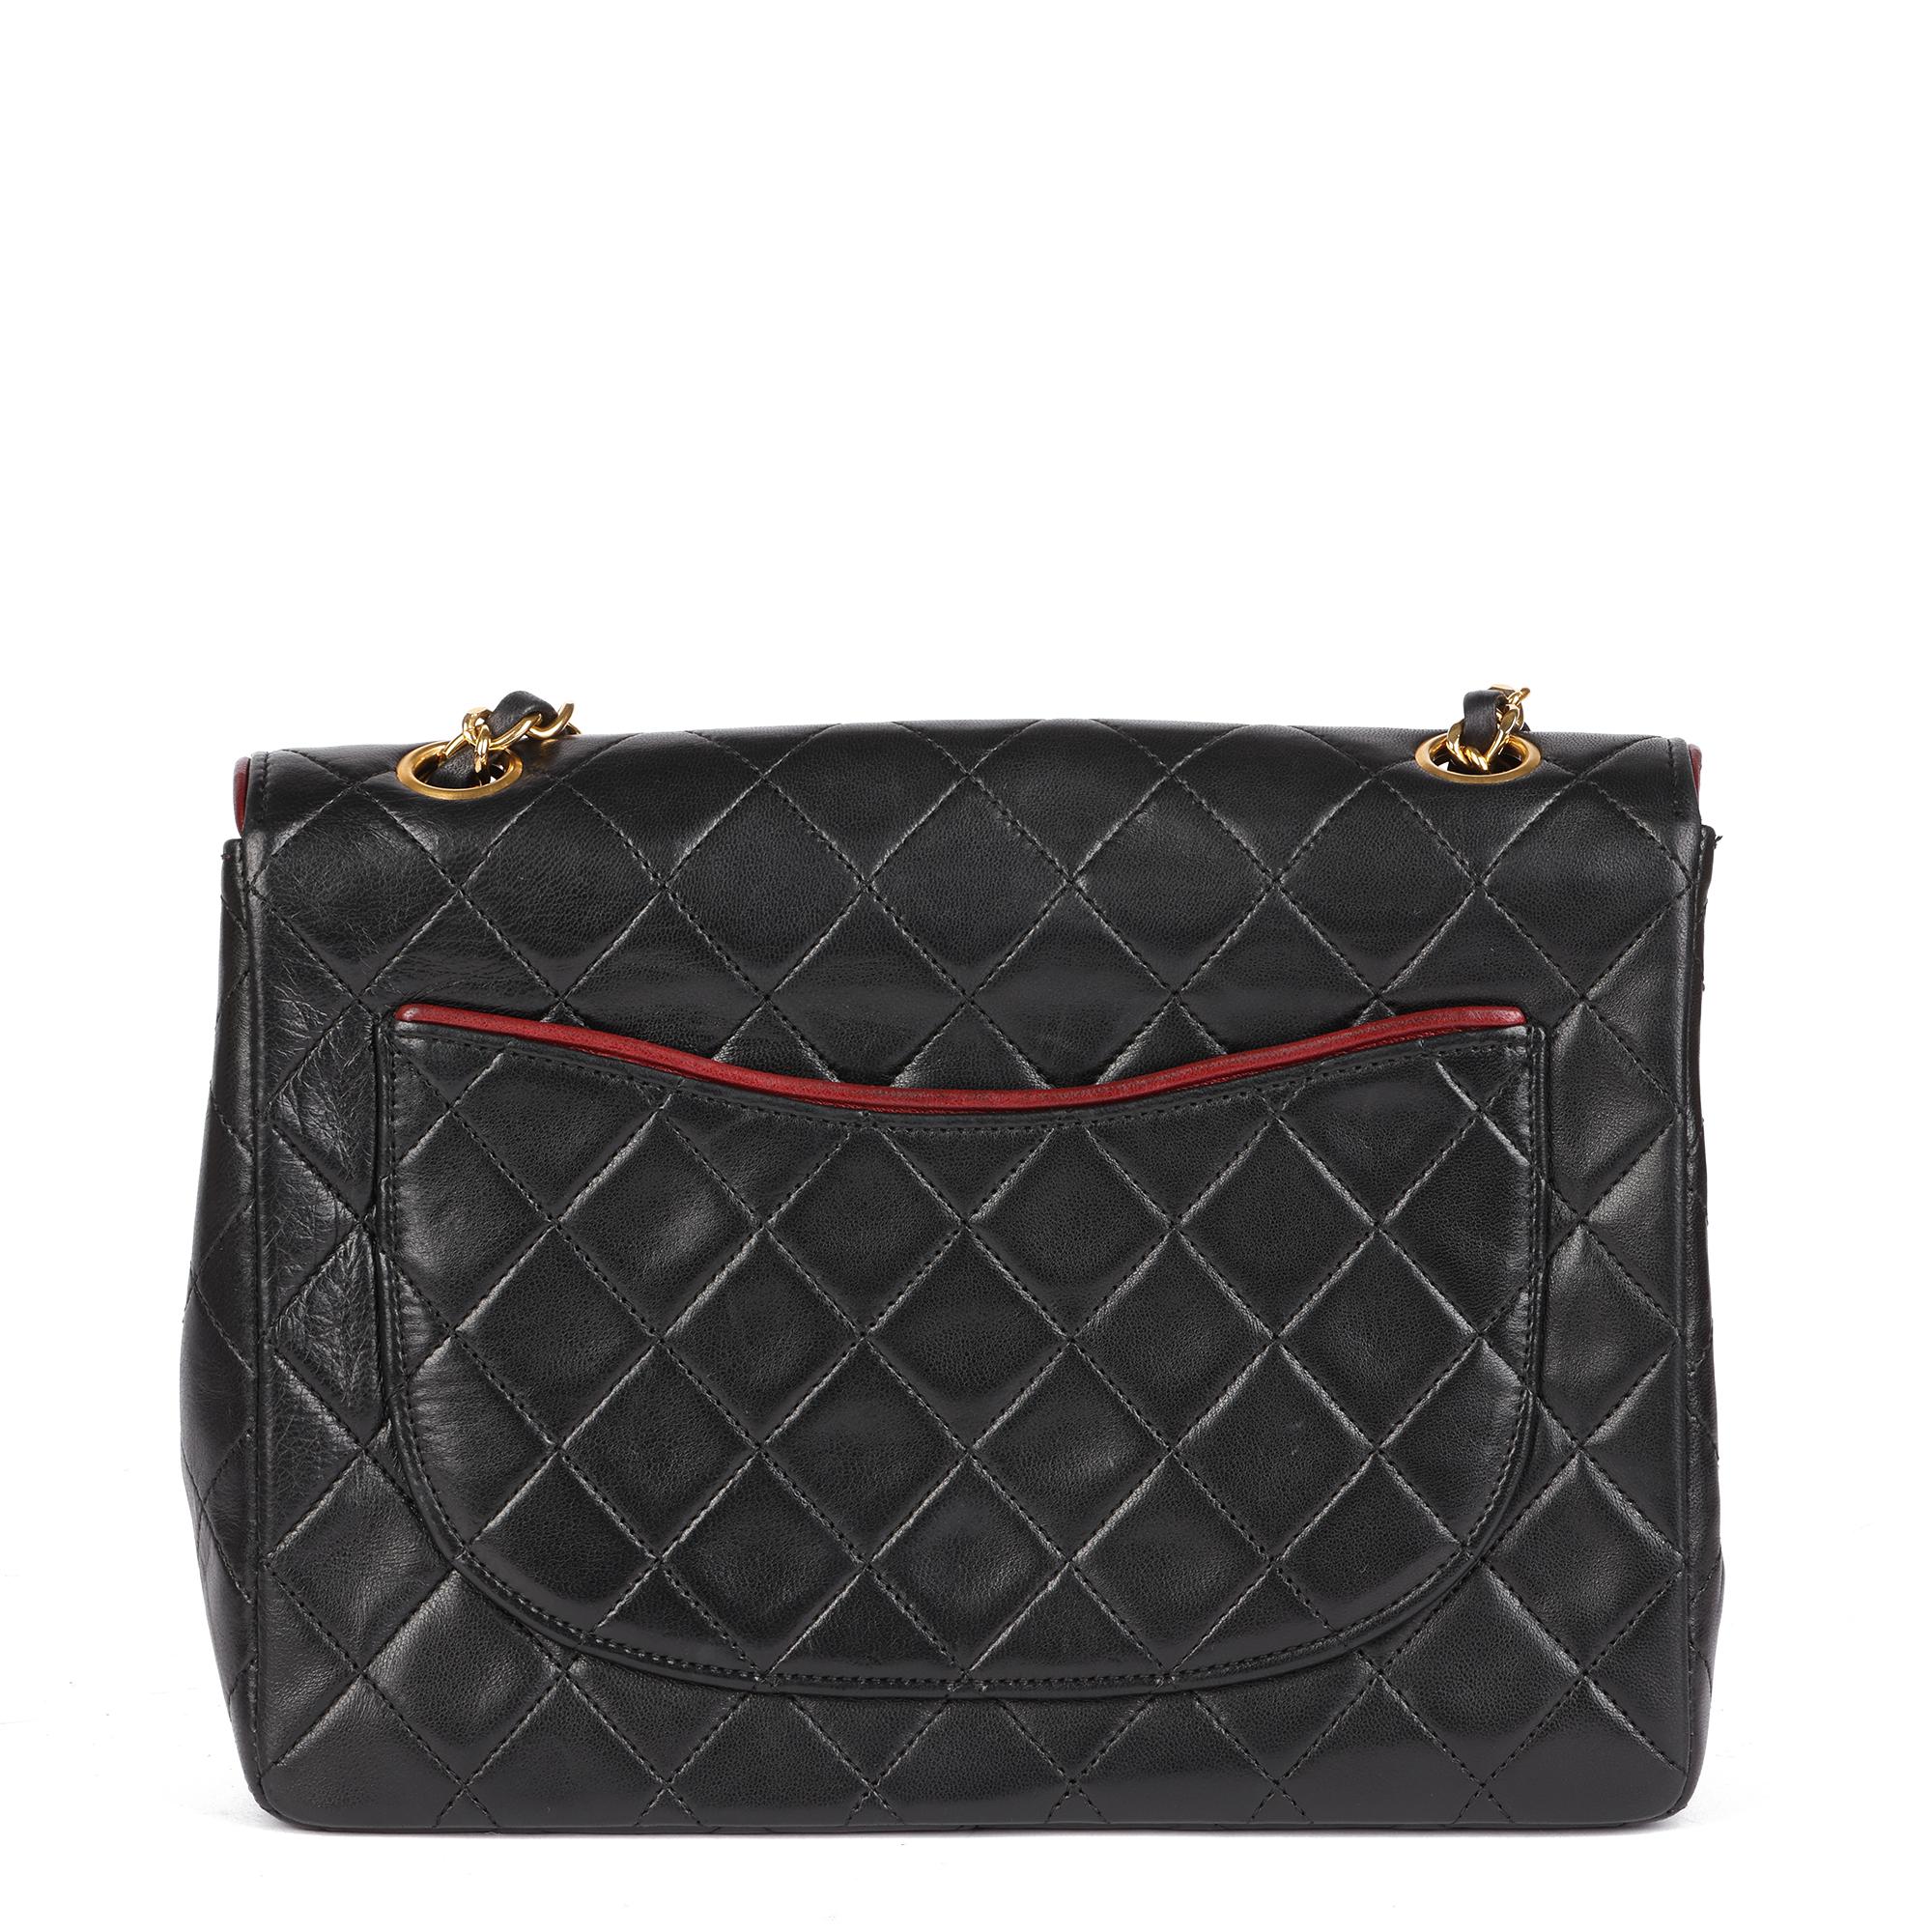 CHANEL Black Quilted Lambskin Vintage Medium Classic Single Flap Bag with Red Tr In Excellent Condition For Sale In Bishop's Stortford, Hertfordshire